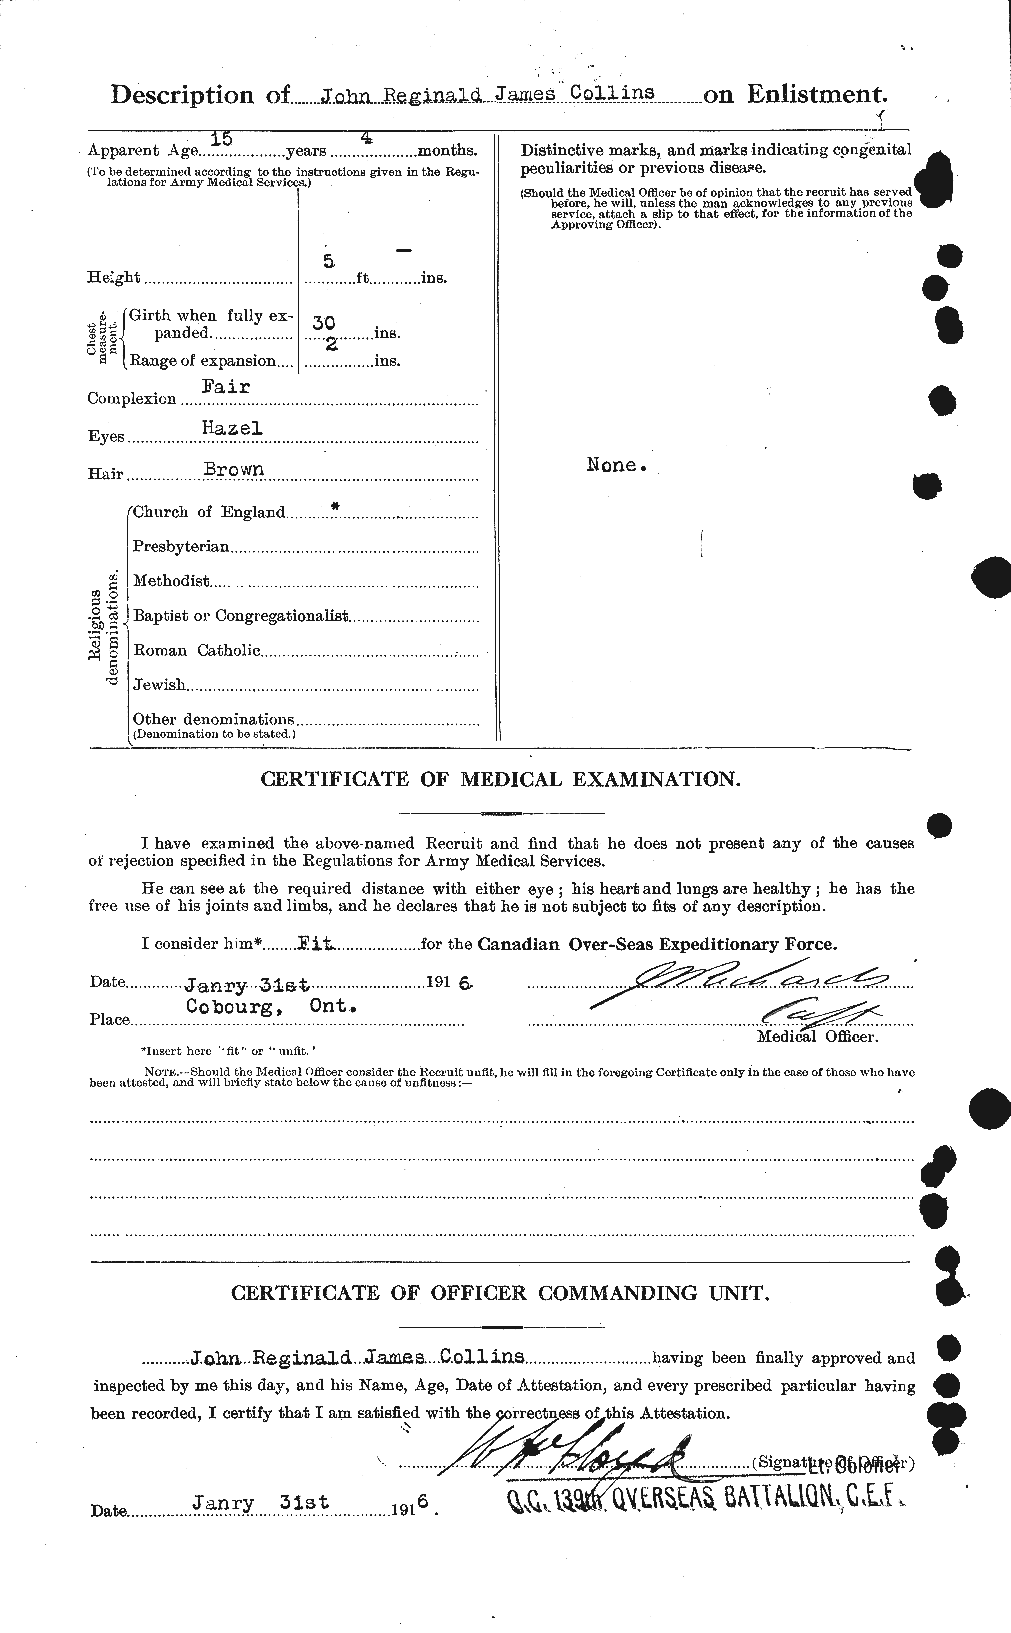 Personnel Records of the First World War - CEF 069538b